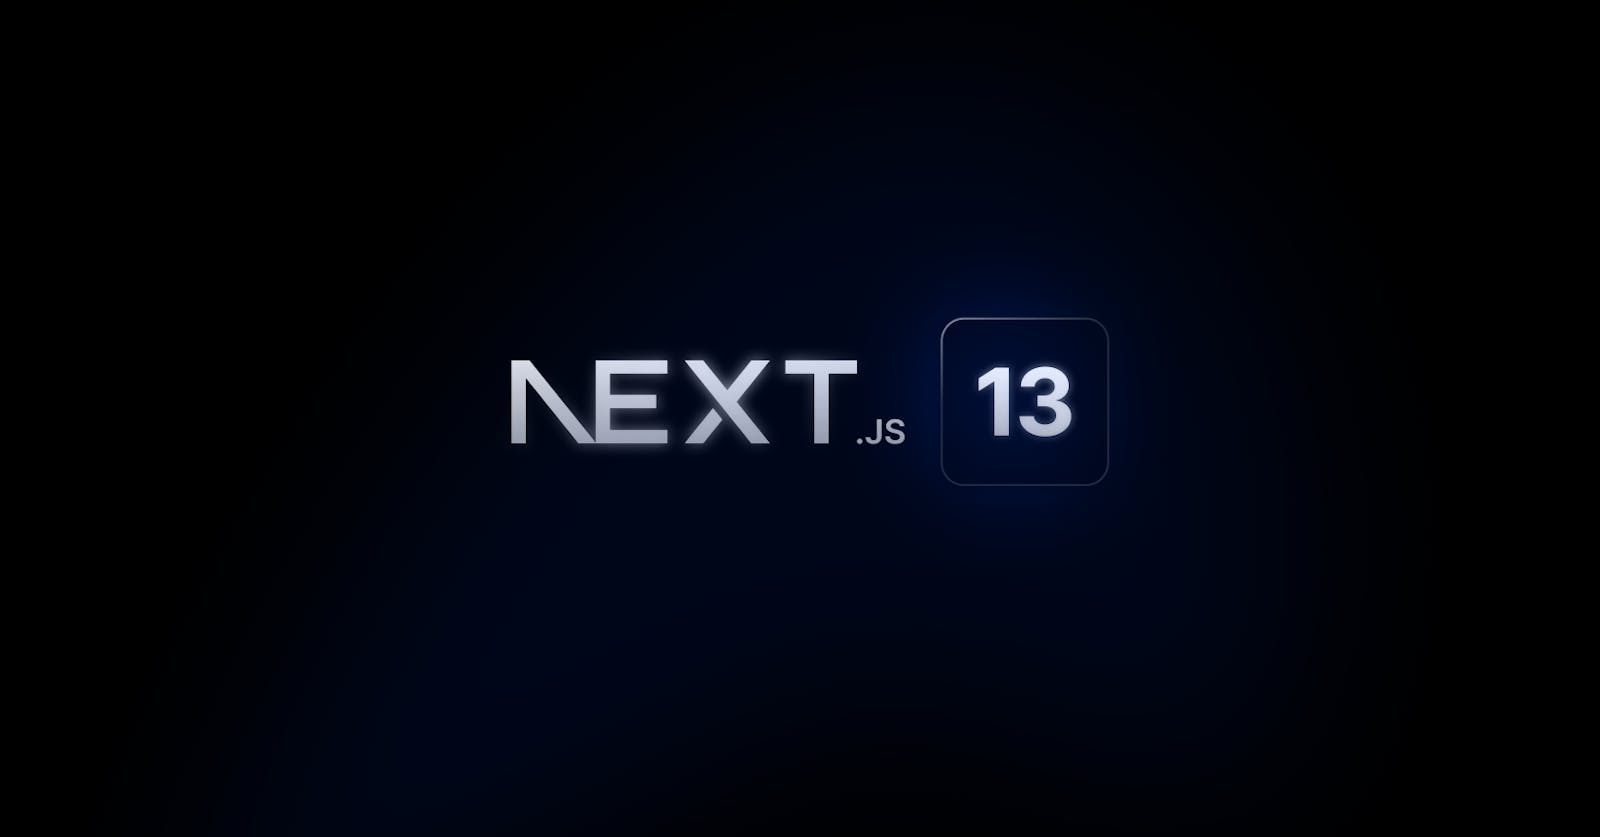 What's New in Nextjs 13!?